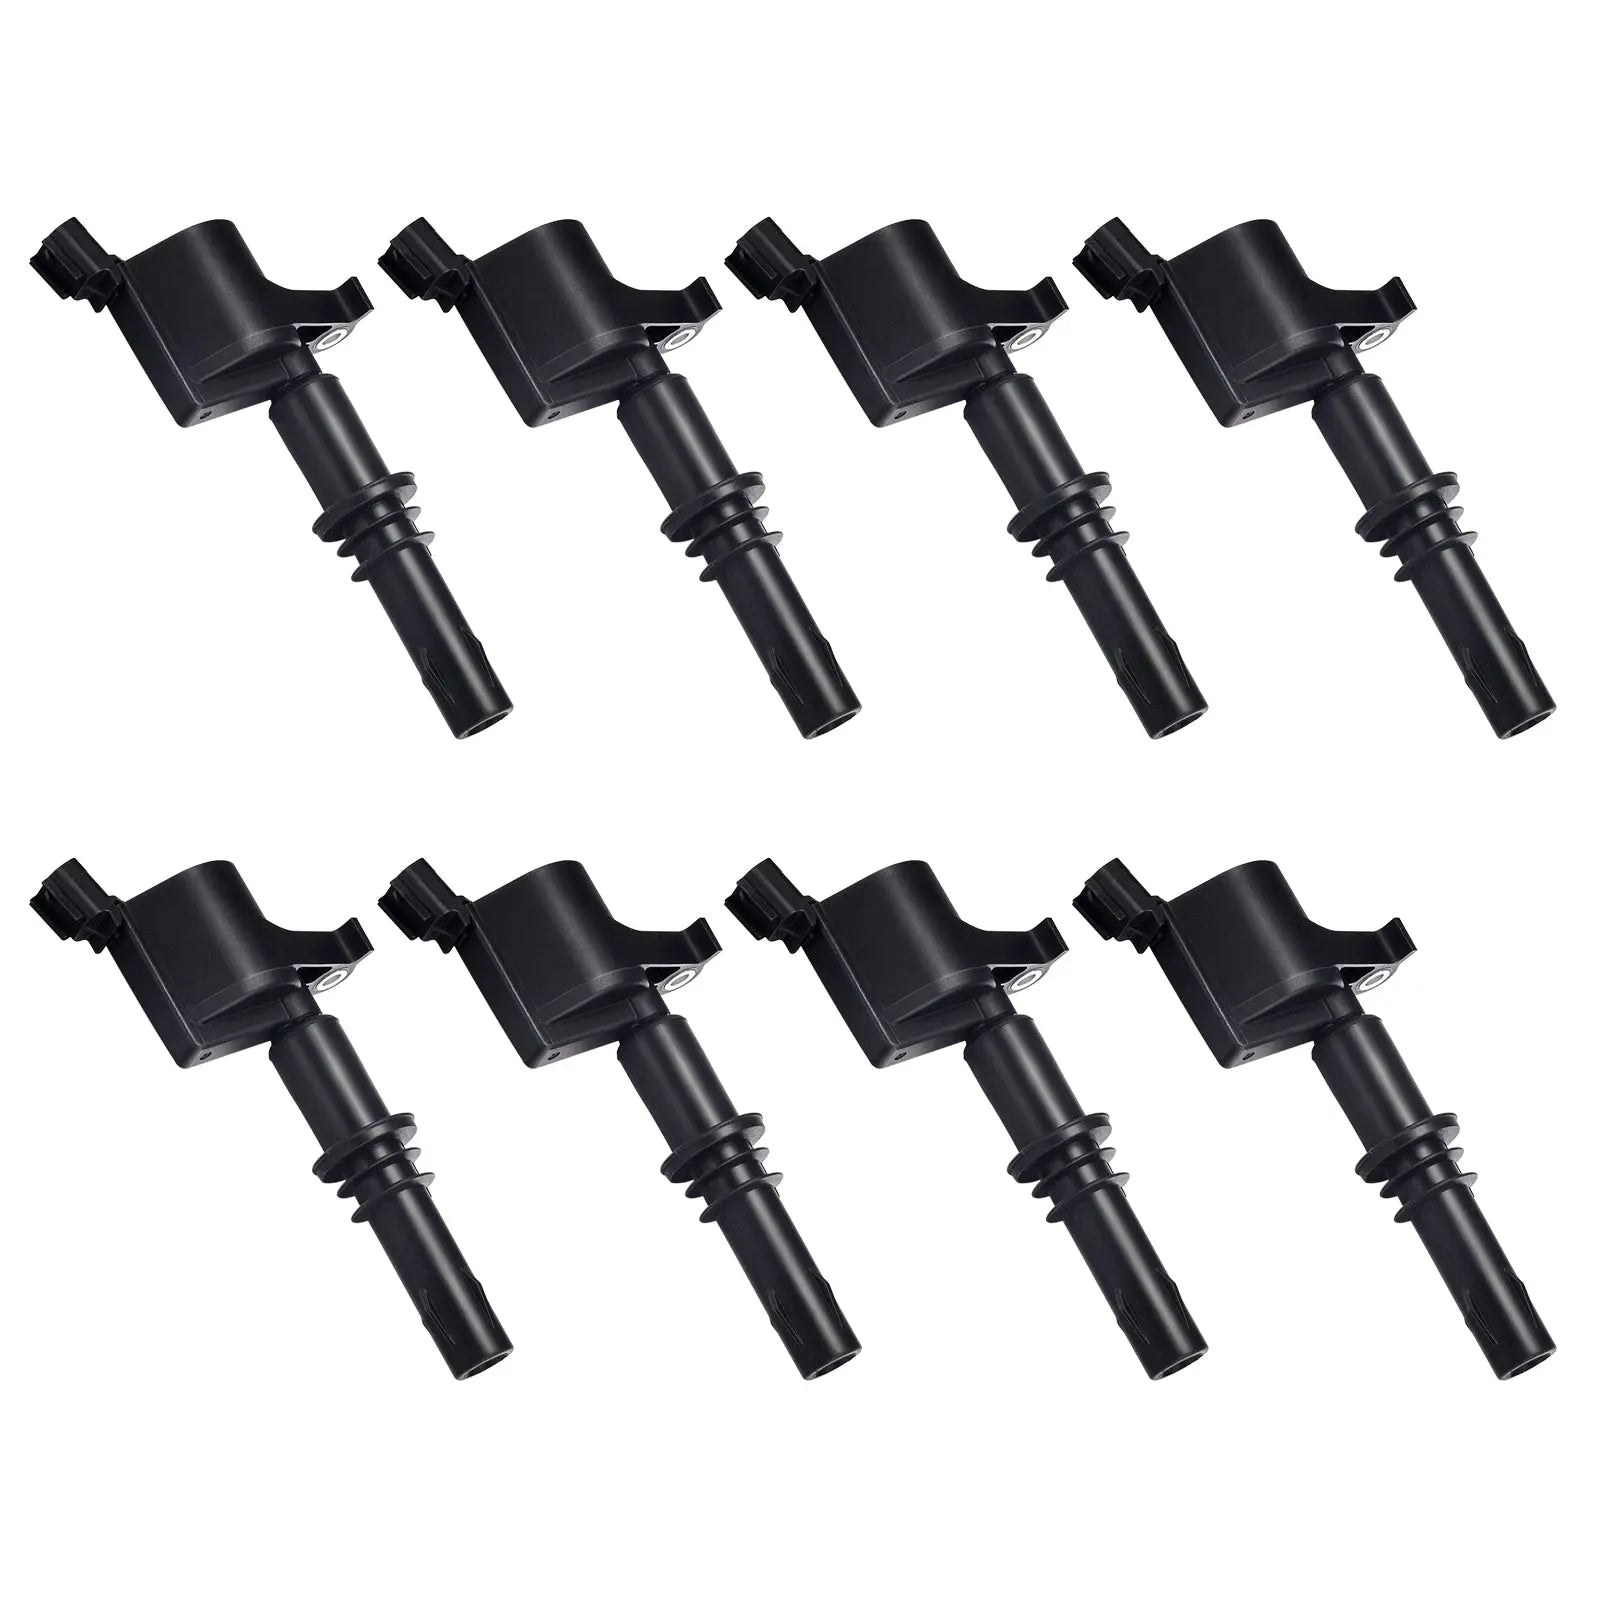 Ignition Coil Pack for 2005-2008 Ford F150 Truck F250 Super Duty Truck Lincoln Mercury V8 V10 4.6L 5.4L 6.8L 5C1584 E508 DG511 C1659 C1541 FD508 8PCS Flashark